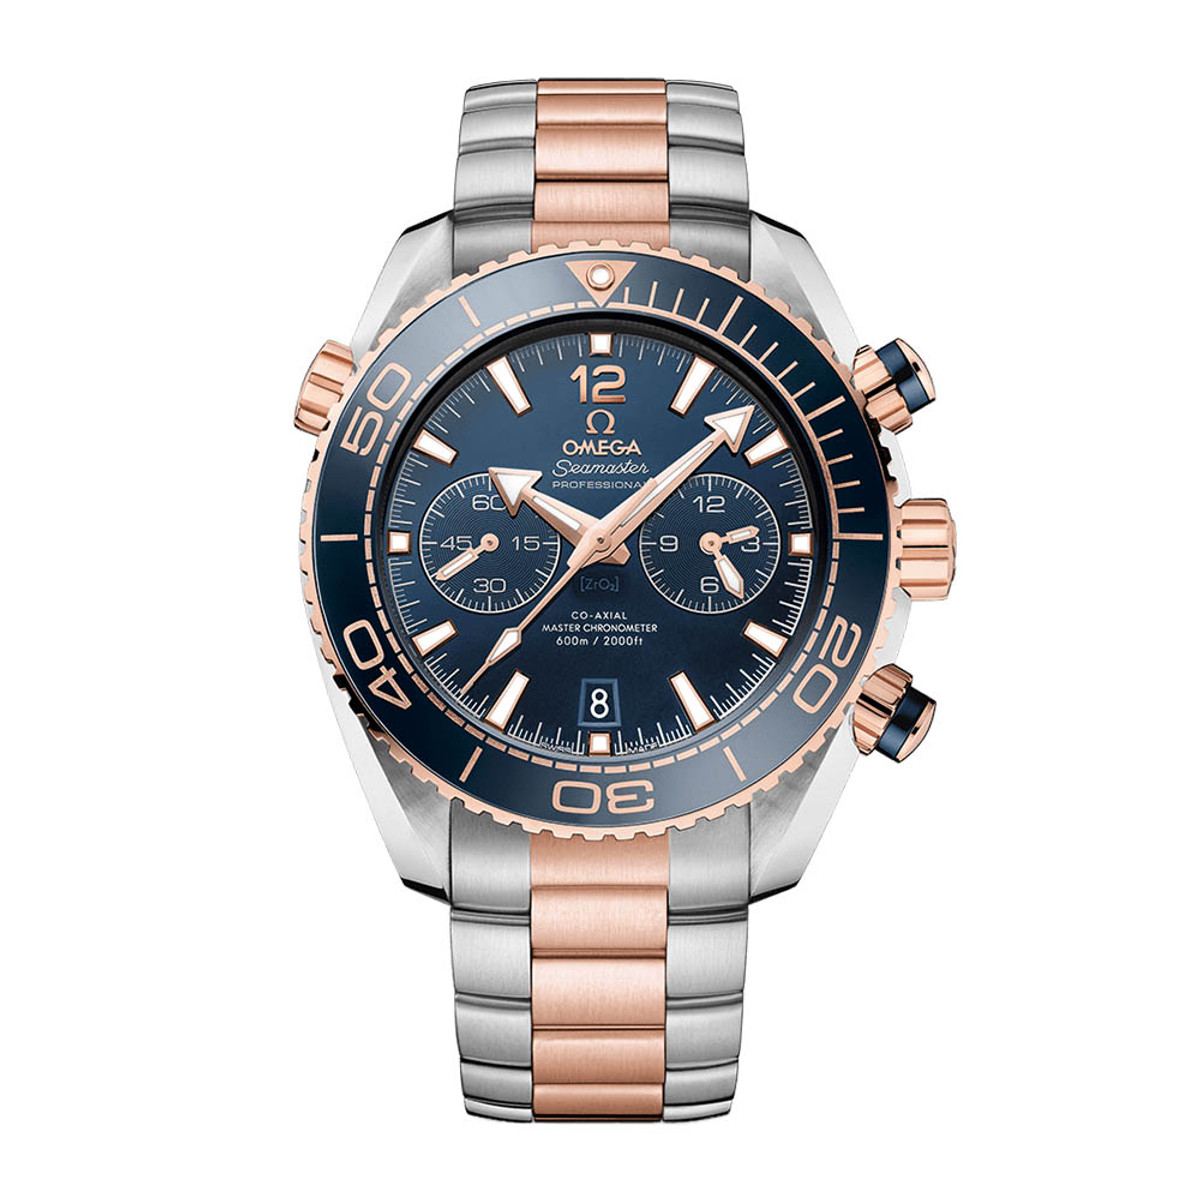 Omega Seamaster Planet Ocean 600M Chronograph 18K Sedna Gold & Steel 45.5mm 215.20.46.51.03.001-WOMG0647 Product Image